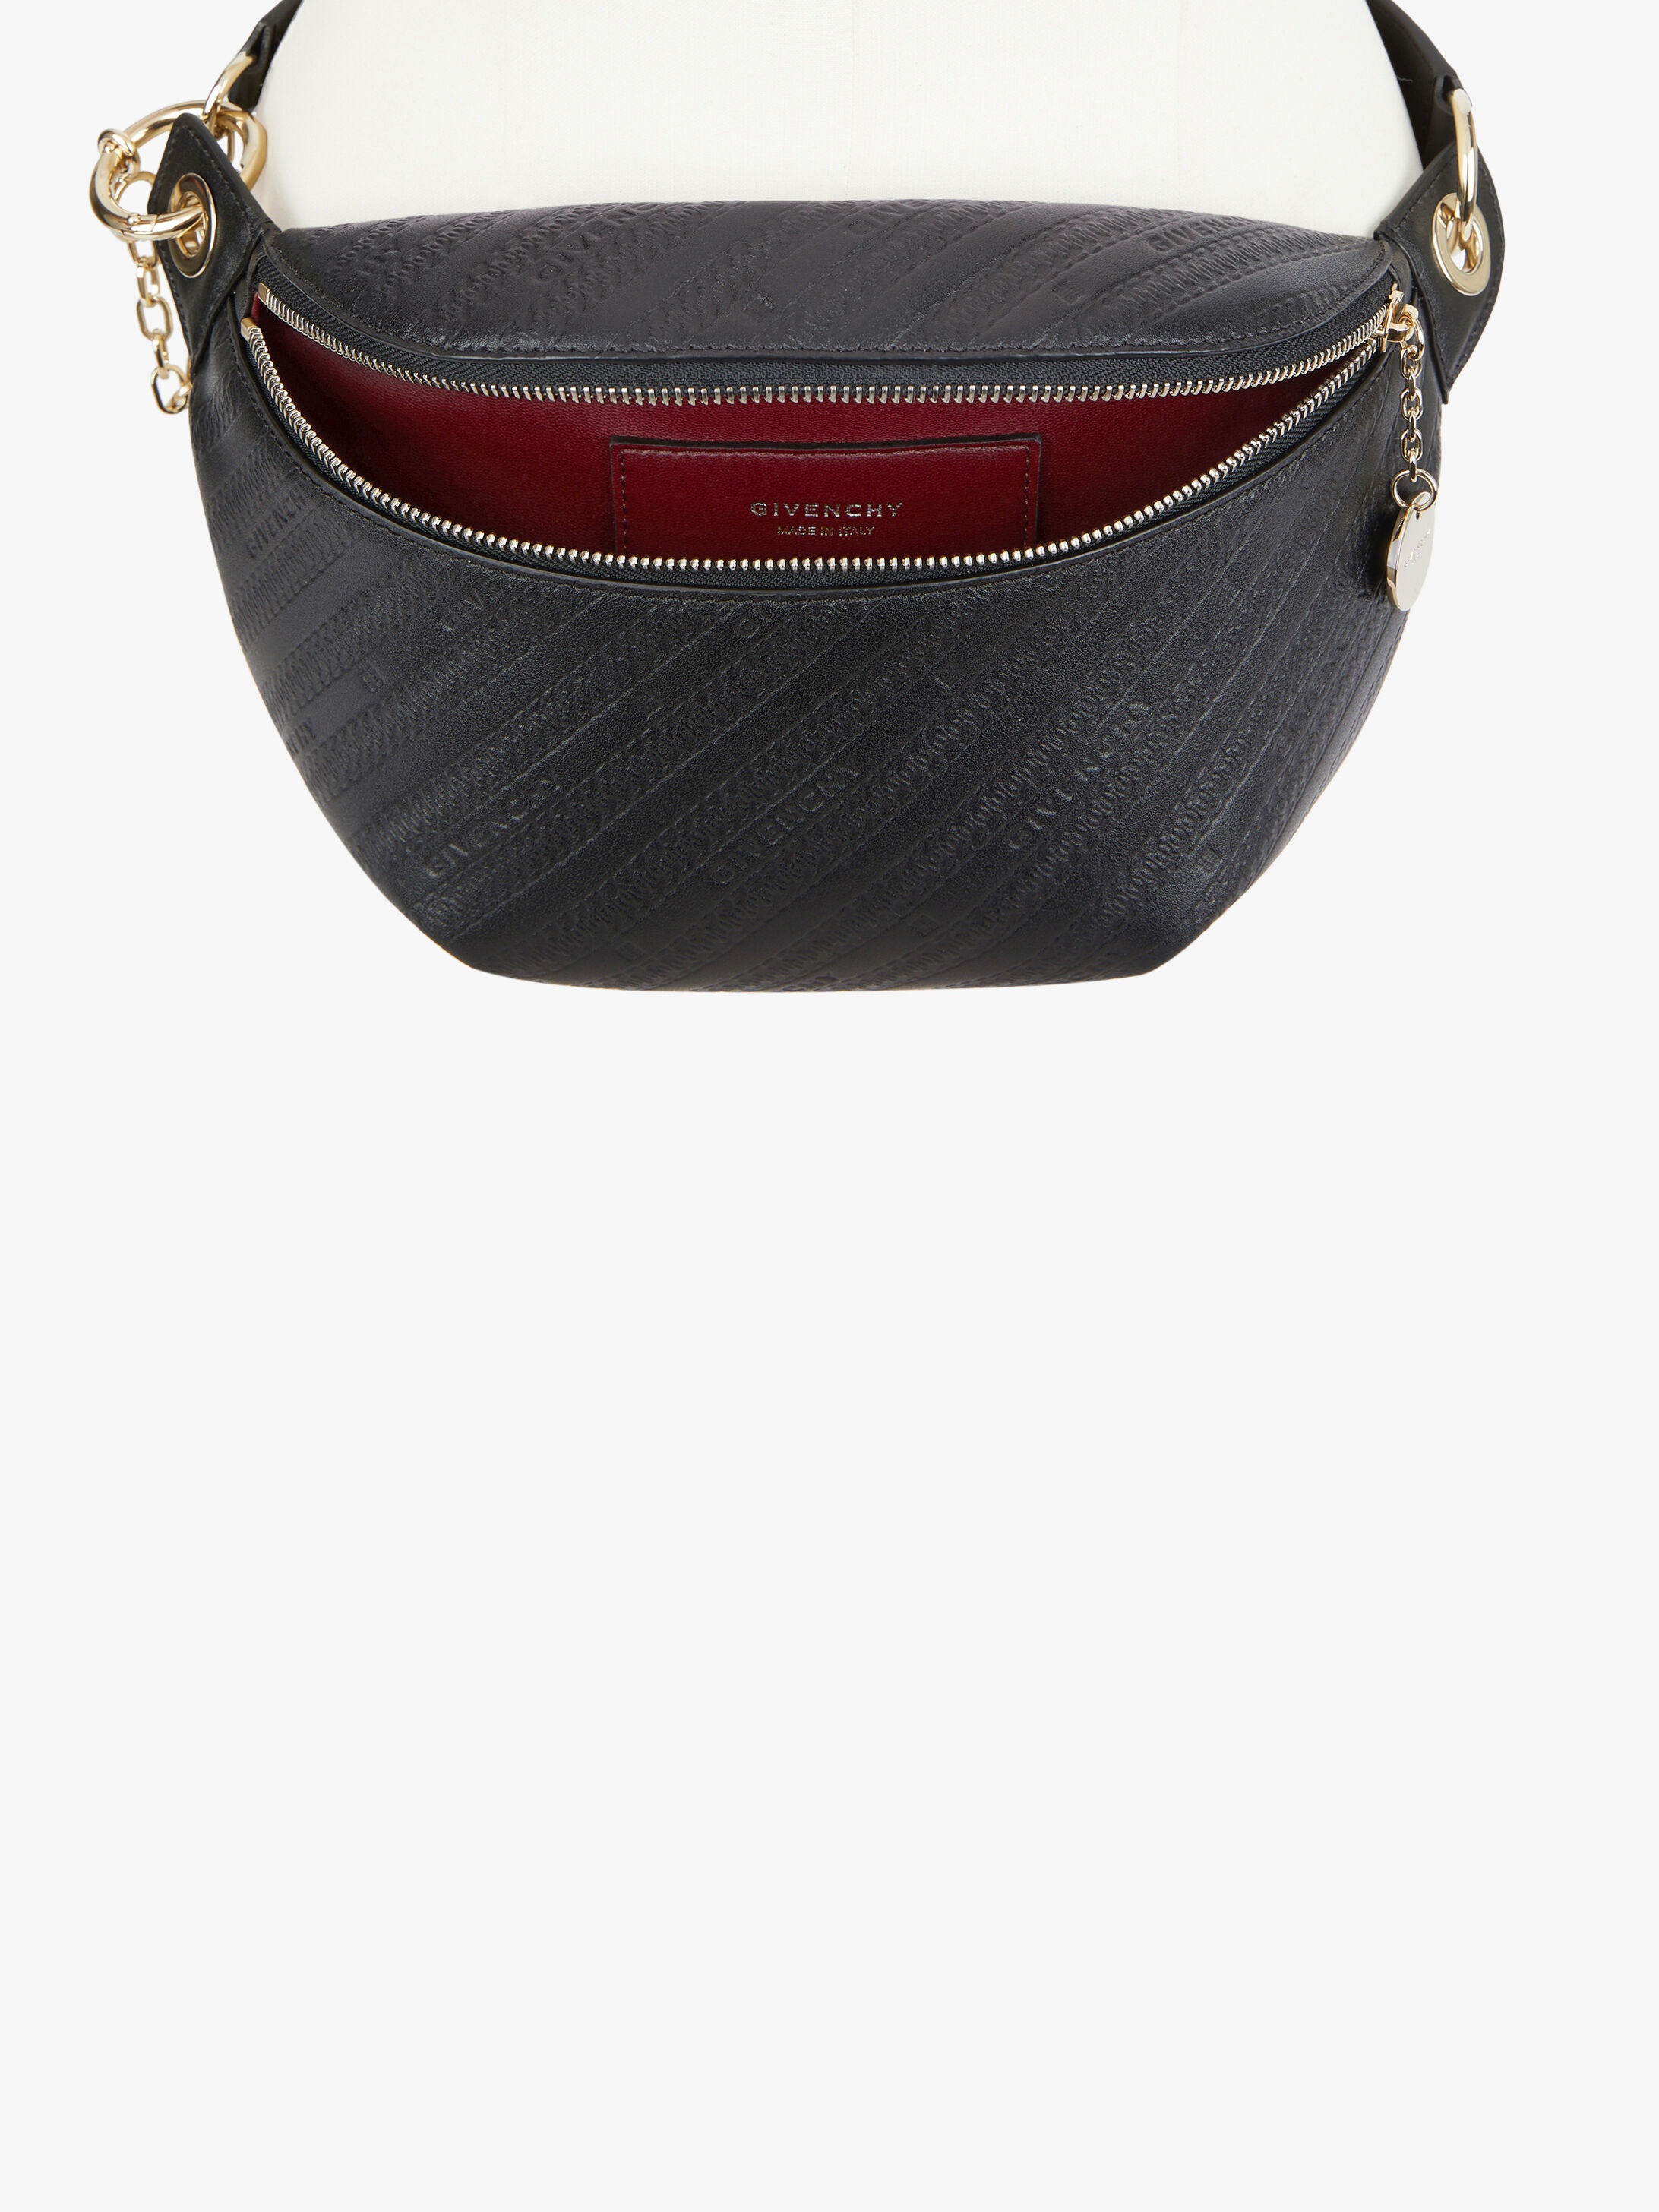 BOND bum bag in GIVENCHY chain embossed leather - 7